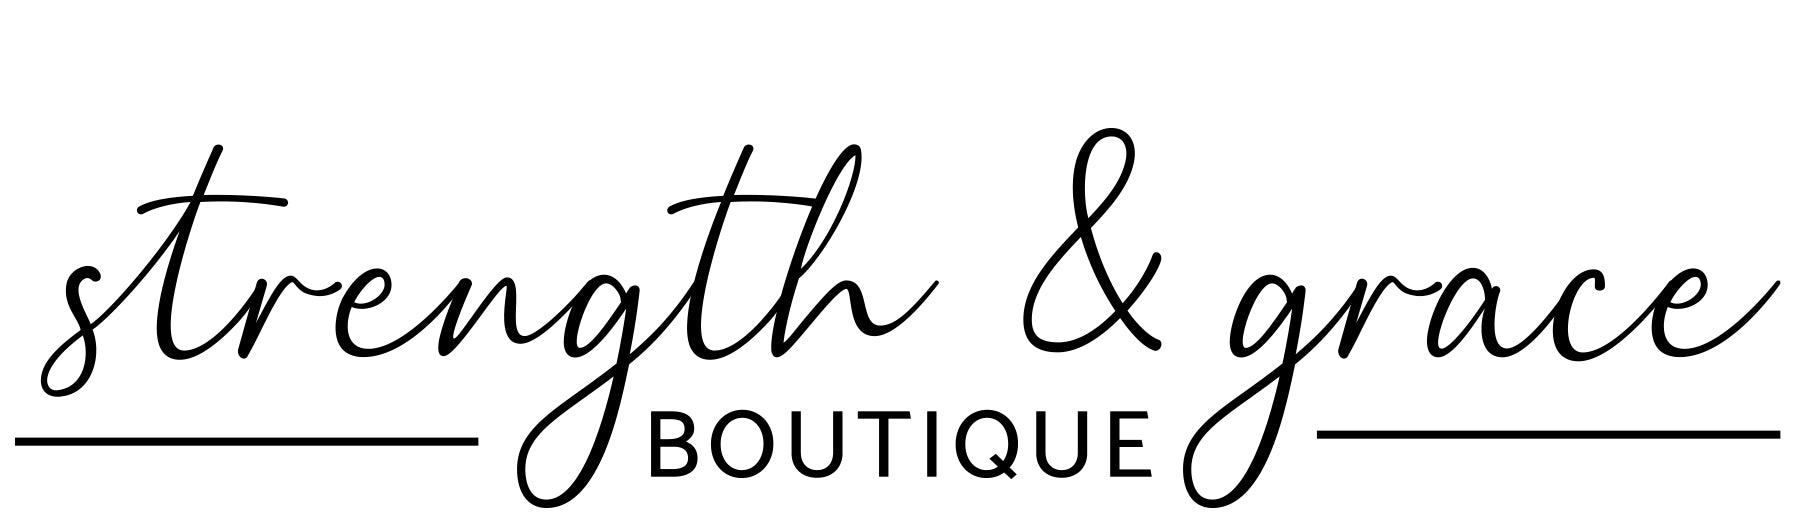 Strength and Grace Boutique Logo | Strenght and Grace Boutique 6 Glen Road, Sandy Hook Connecticut 06482